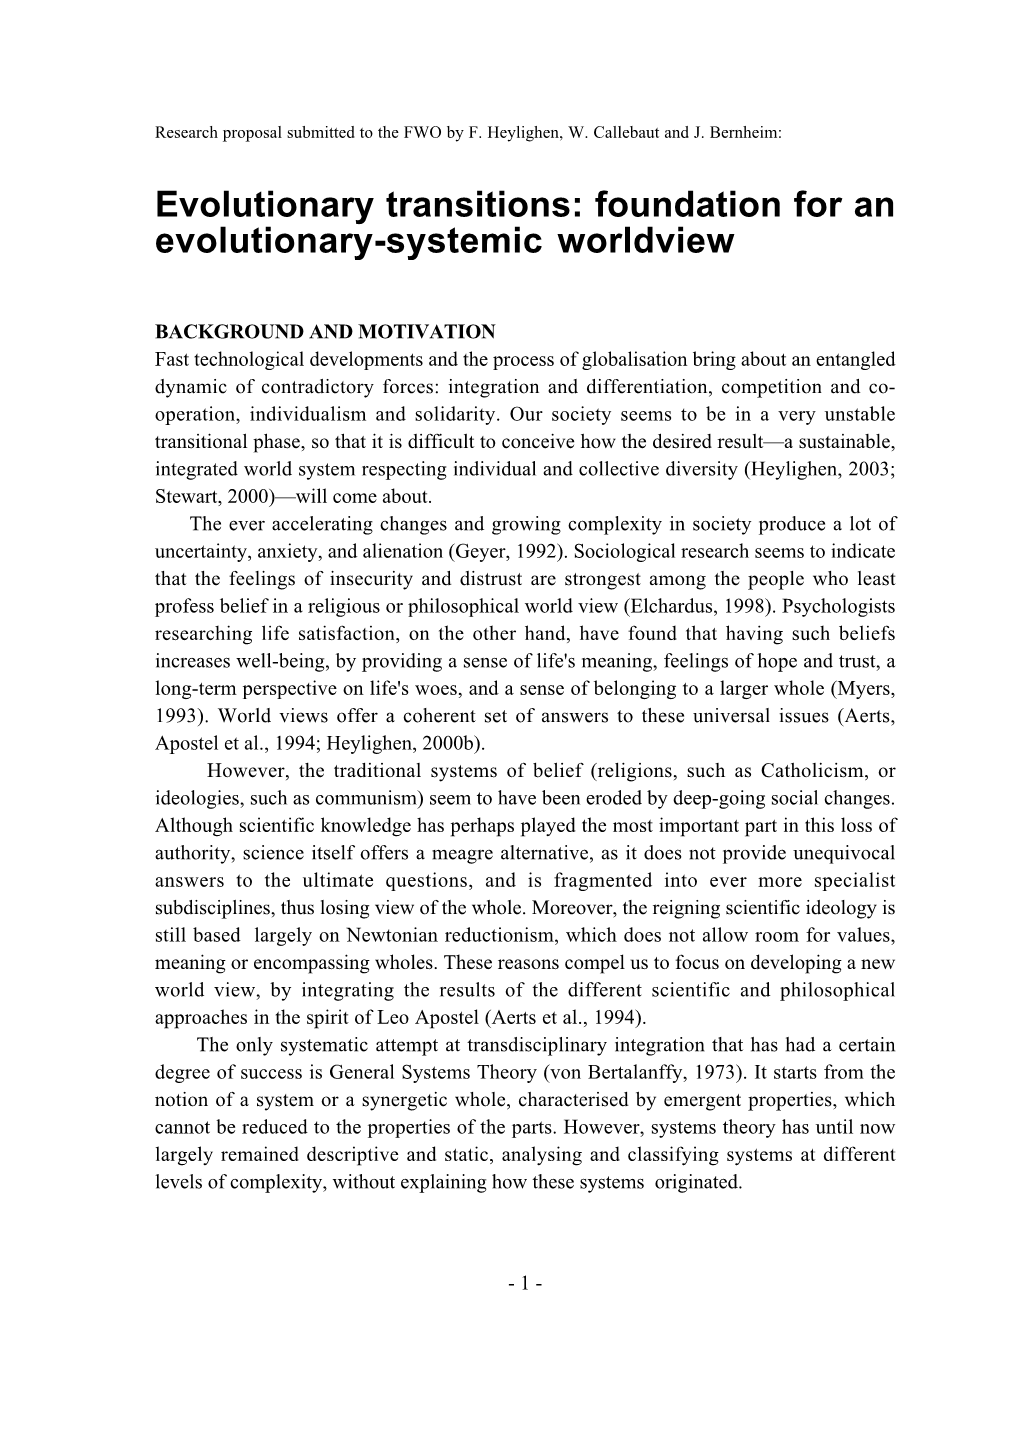 Evolutionary Transitions: Foundation for an Evolutionary-Systemic Worldview